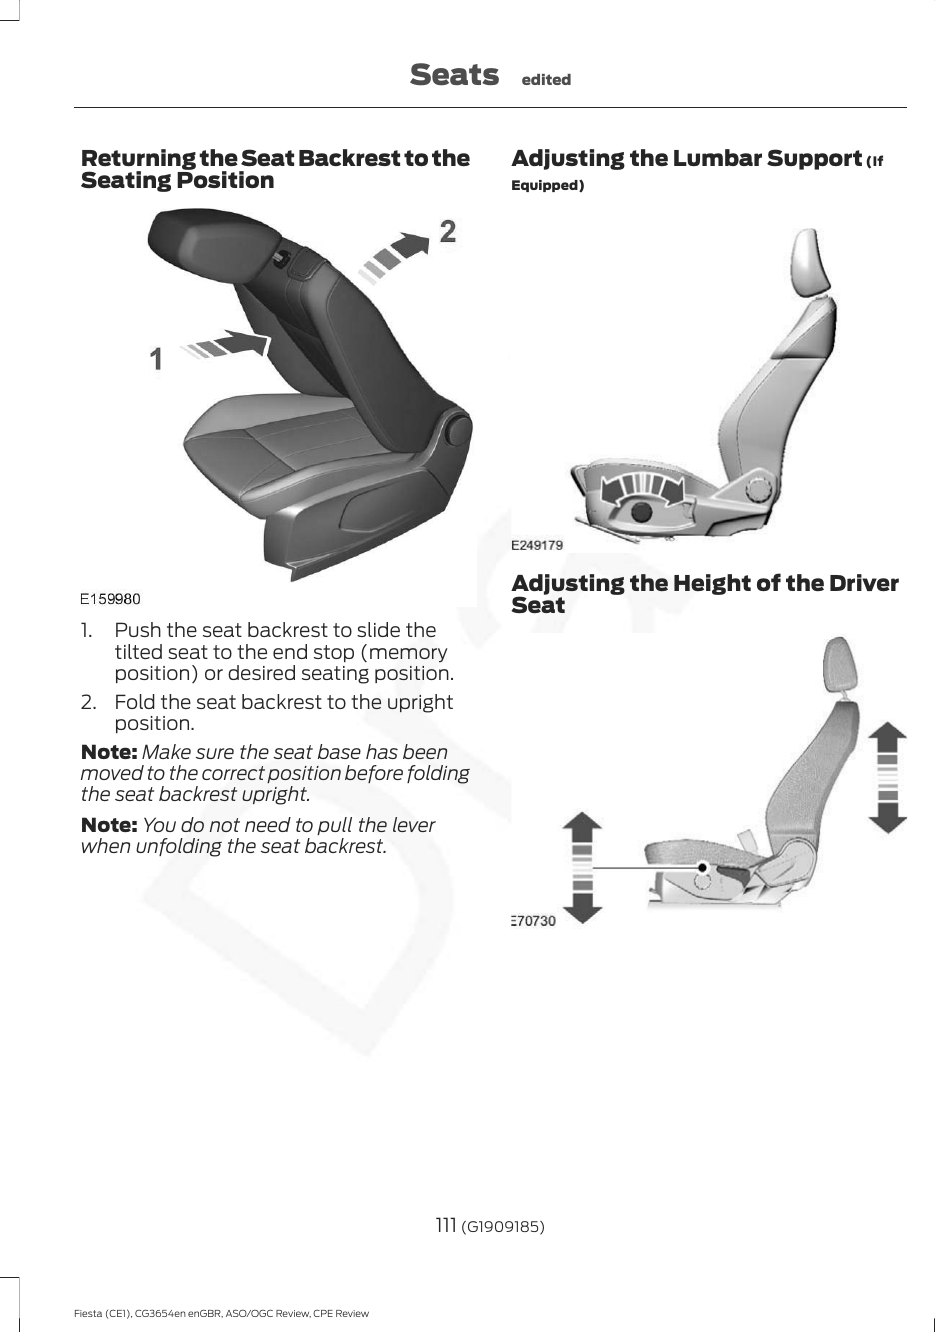 Returning the Seat Backrest to theSeating Position1. Push the seat backrest to slide thetilted seat to the end stop (memoryposition) or desired seating position.2. Fold the seat backrest to the uprightposition.Note: Make sure the seat base has beenmoved to the correct position before foldingthe seat backrest upright.Note: You do not need to pull the leverwhen unfolding the seat backrest.Adjusting the Lumbar Support (IfEquipped)Adjusting the Height of the DriverSeat111 (G1909185)Fiesta (CE1), CG3654en enGBR, ASO/OGC Review, CPE ReviewSeats edited